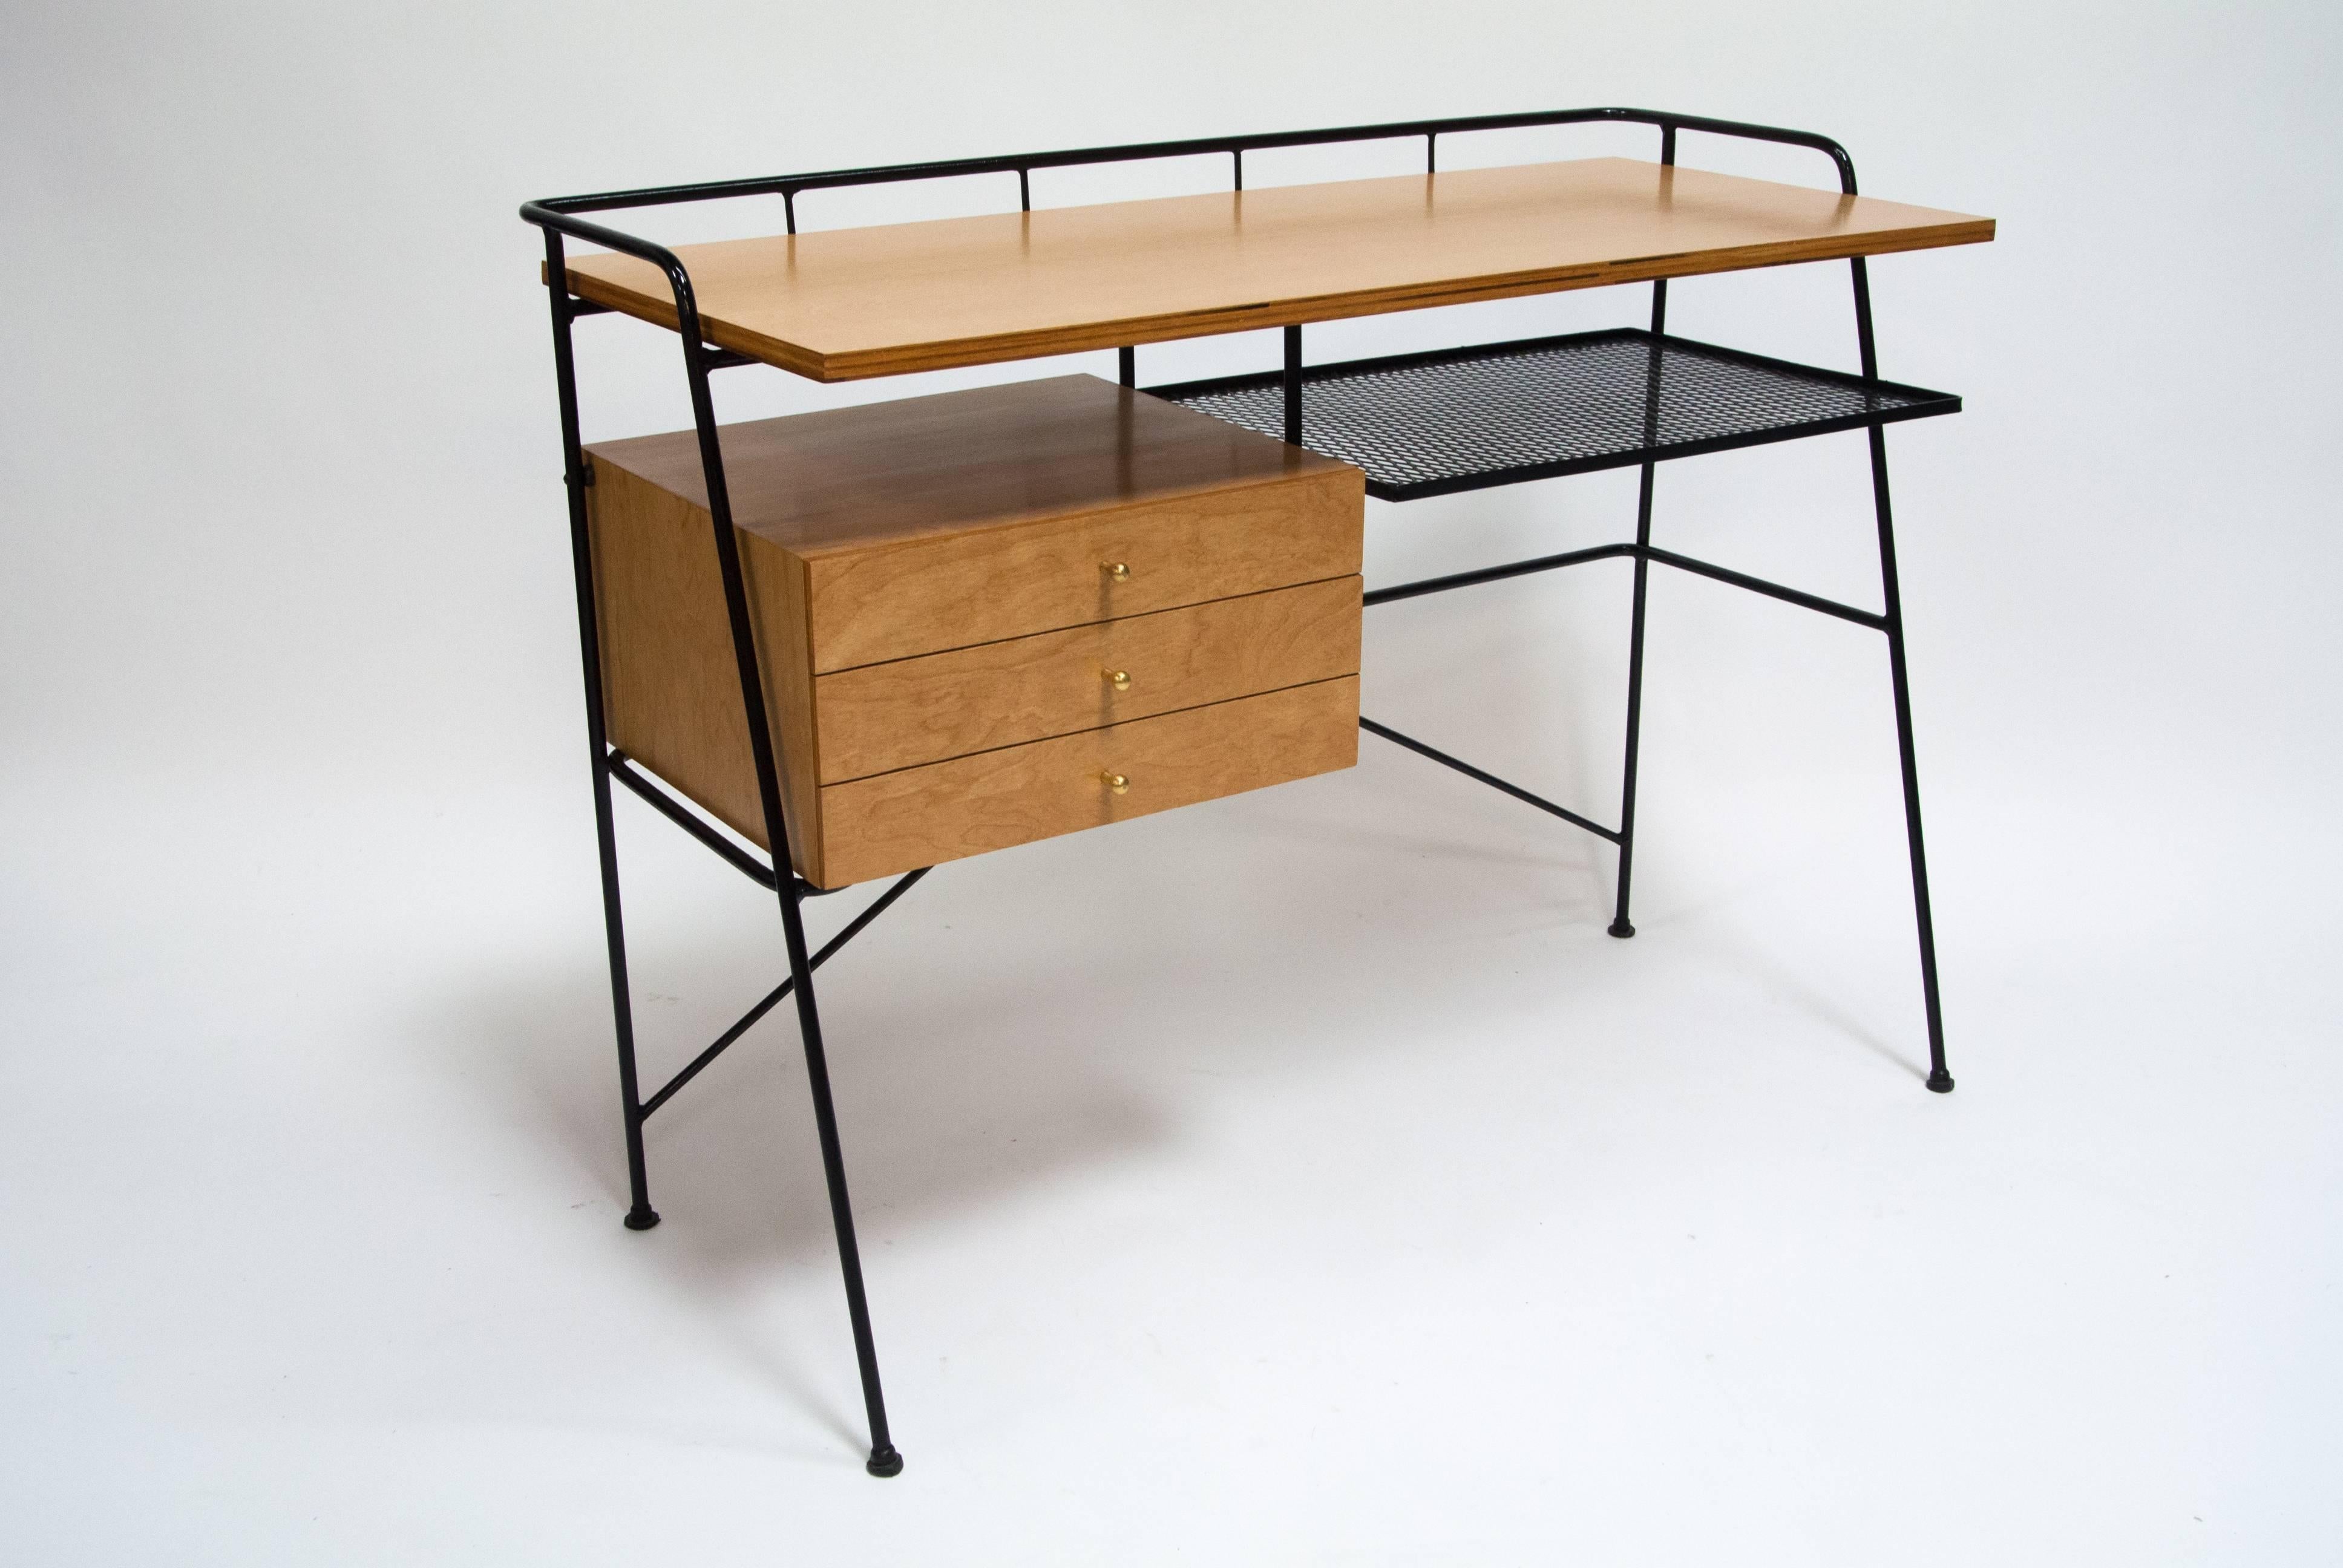 Rare iron and birch desk designed by Arthur Umanoff for Elton, circa 1950s. Great desk for compact spaces. 

Desk top height 30.75